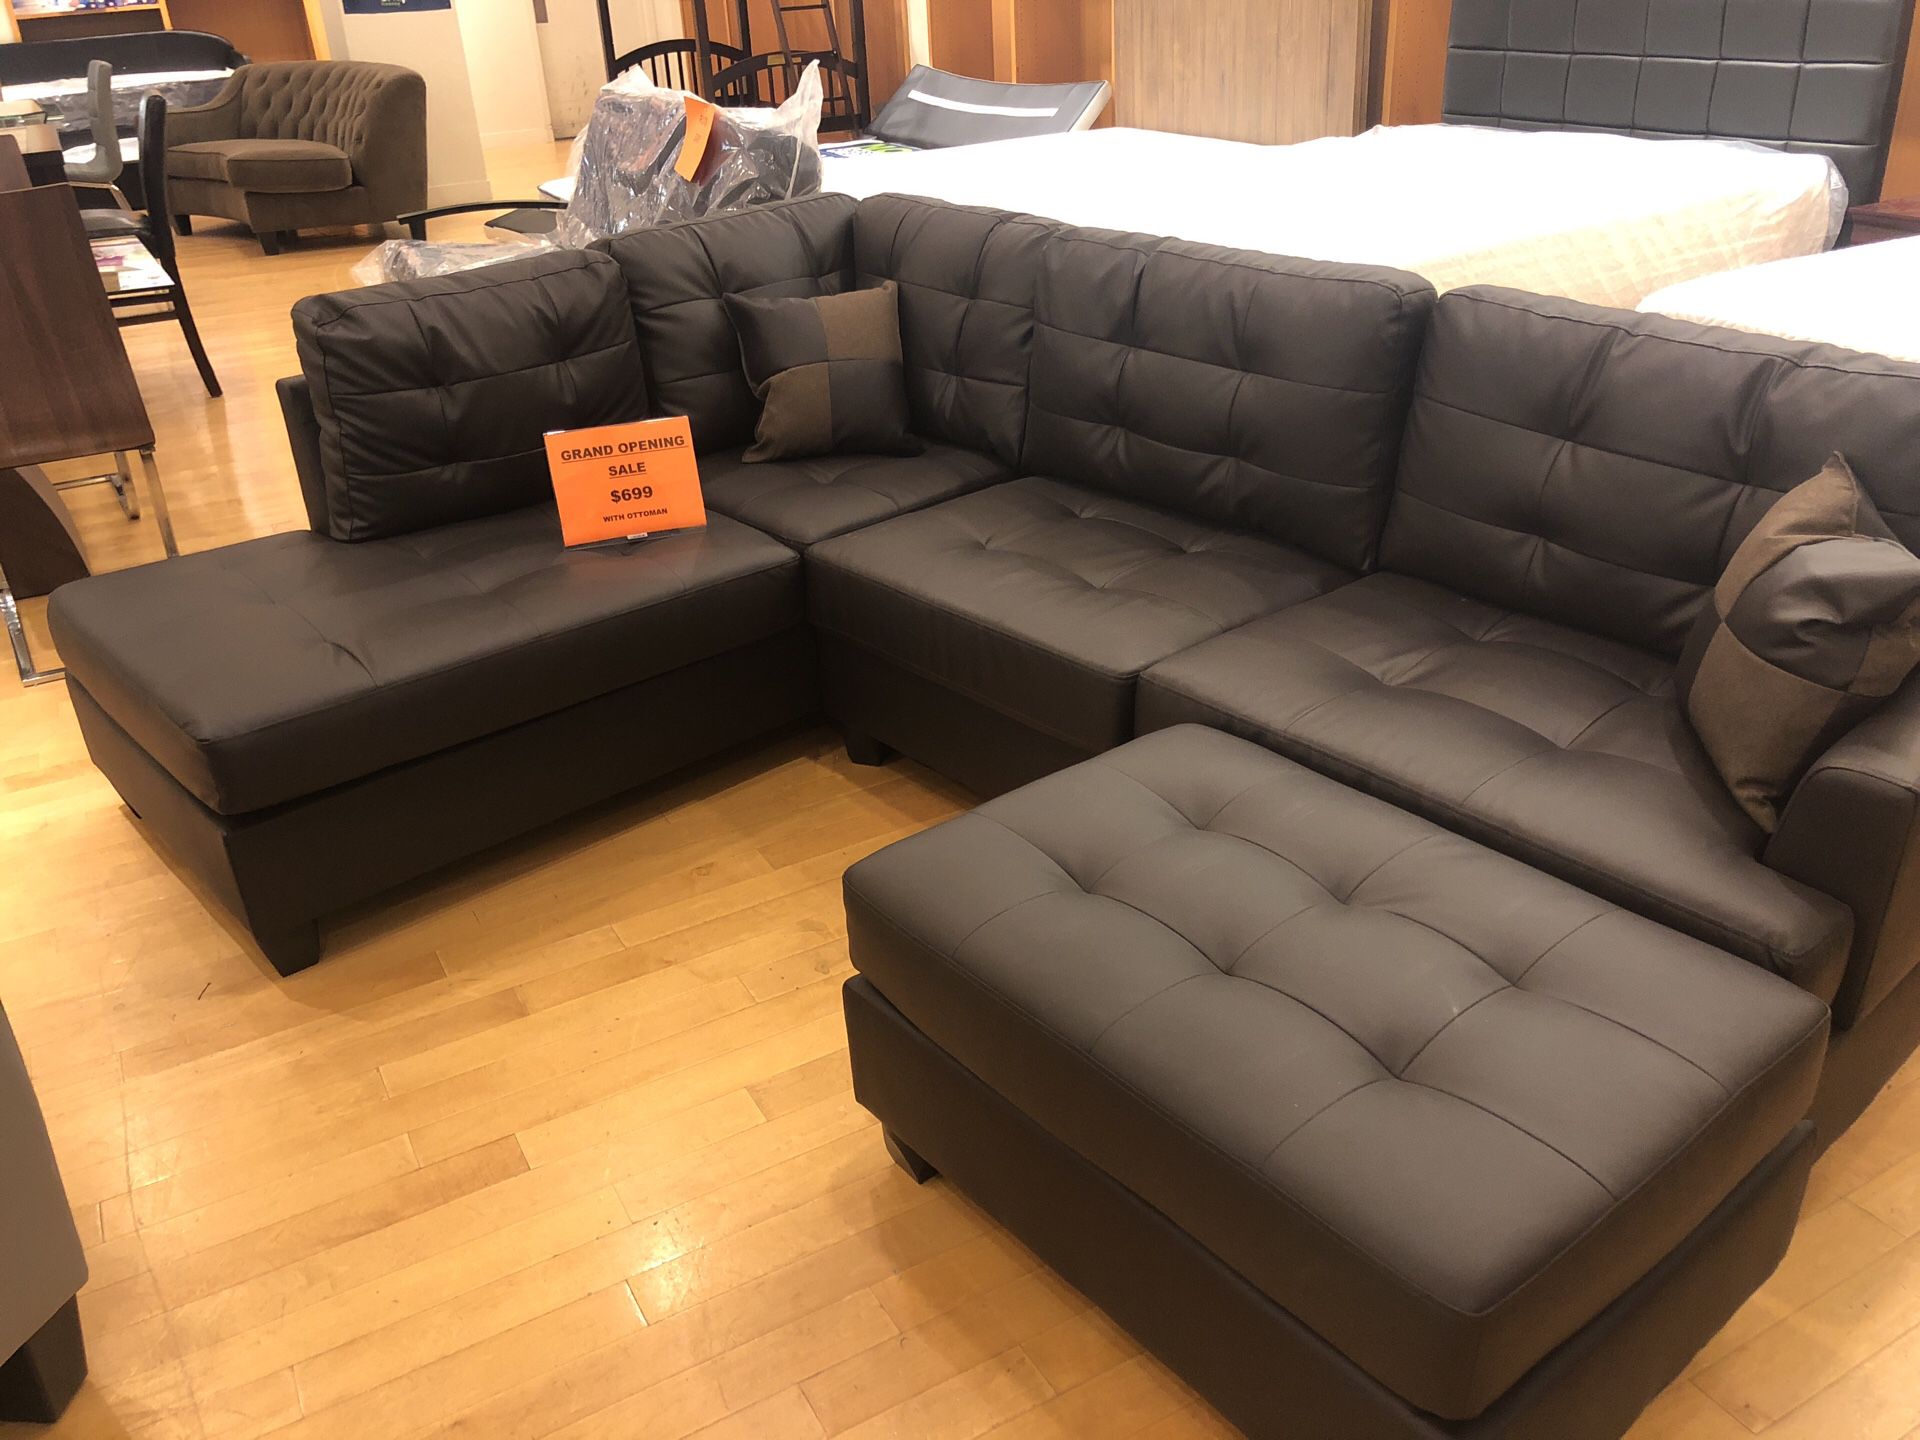 Expresso sectional sofa with ottoman